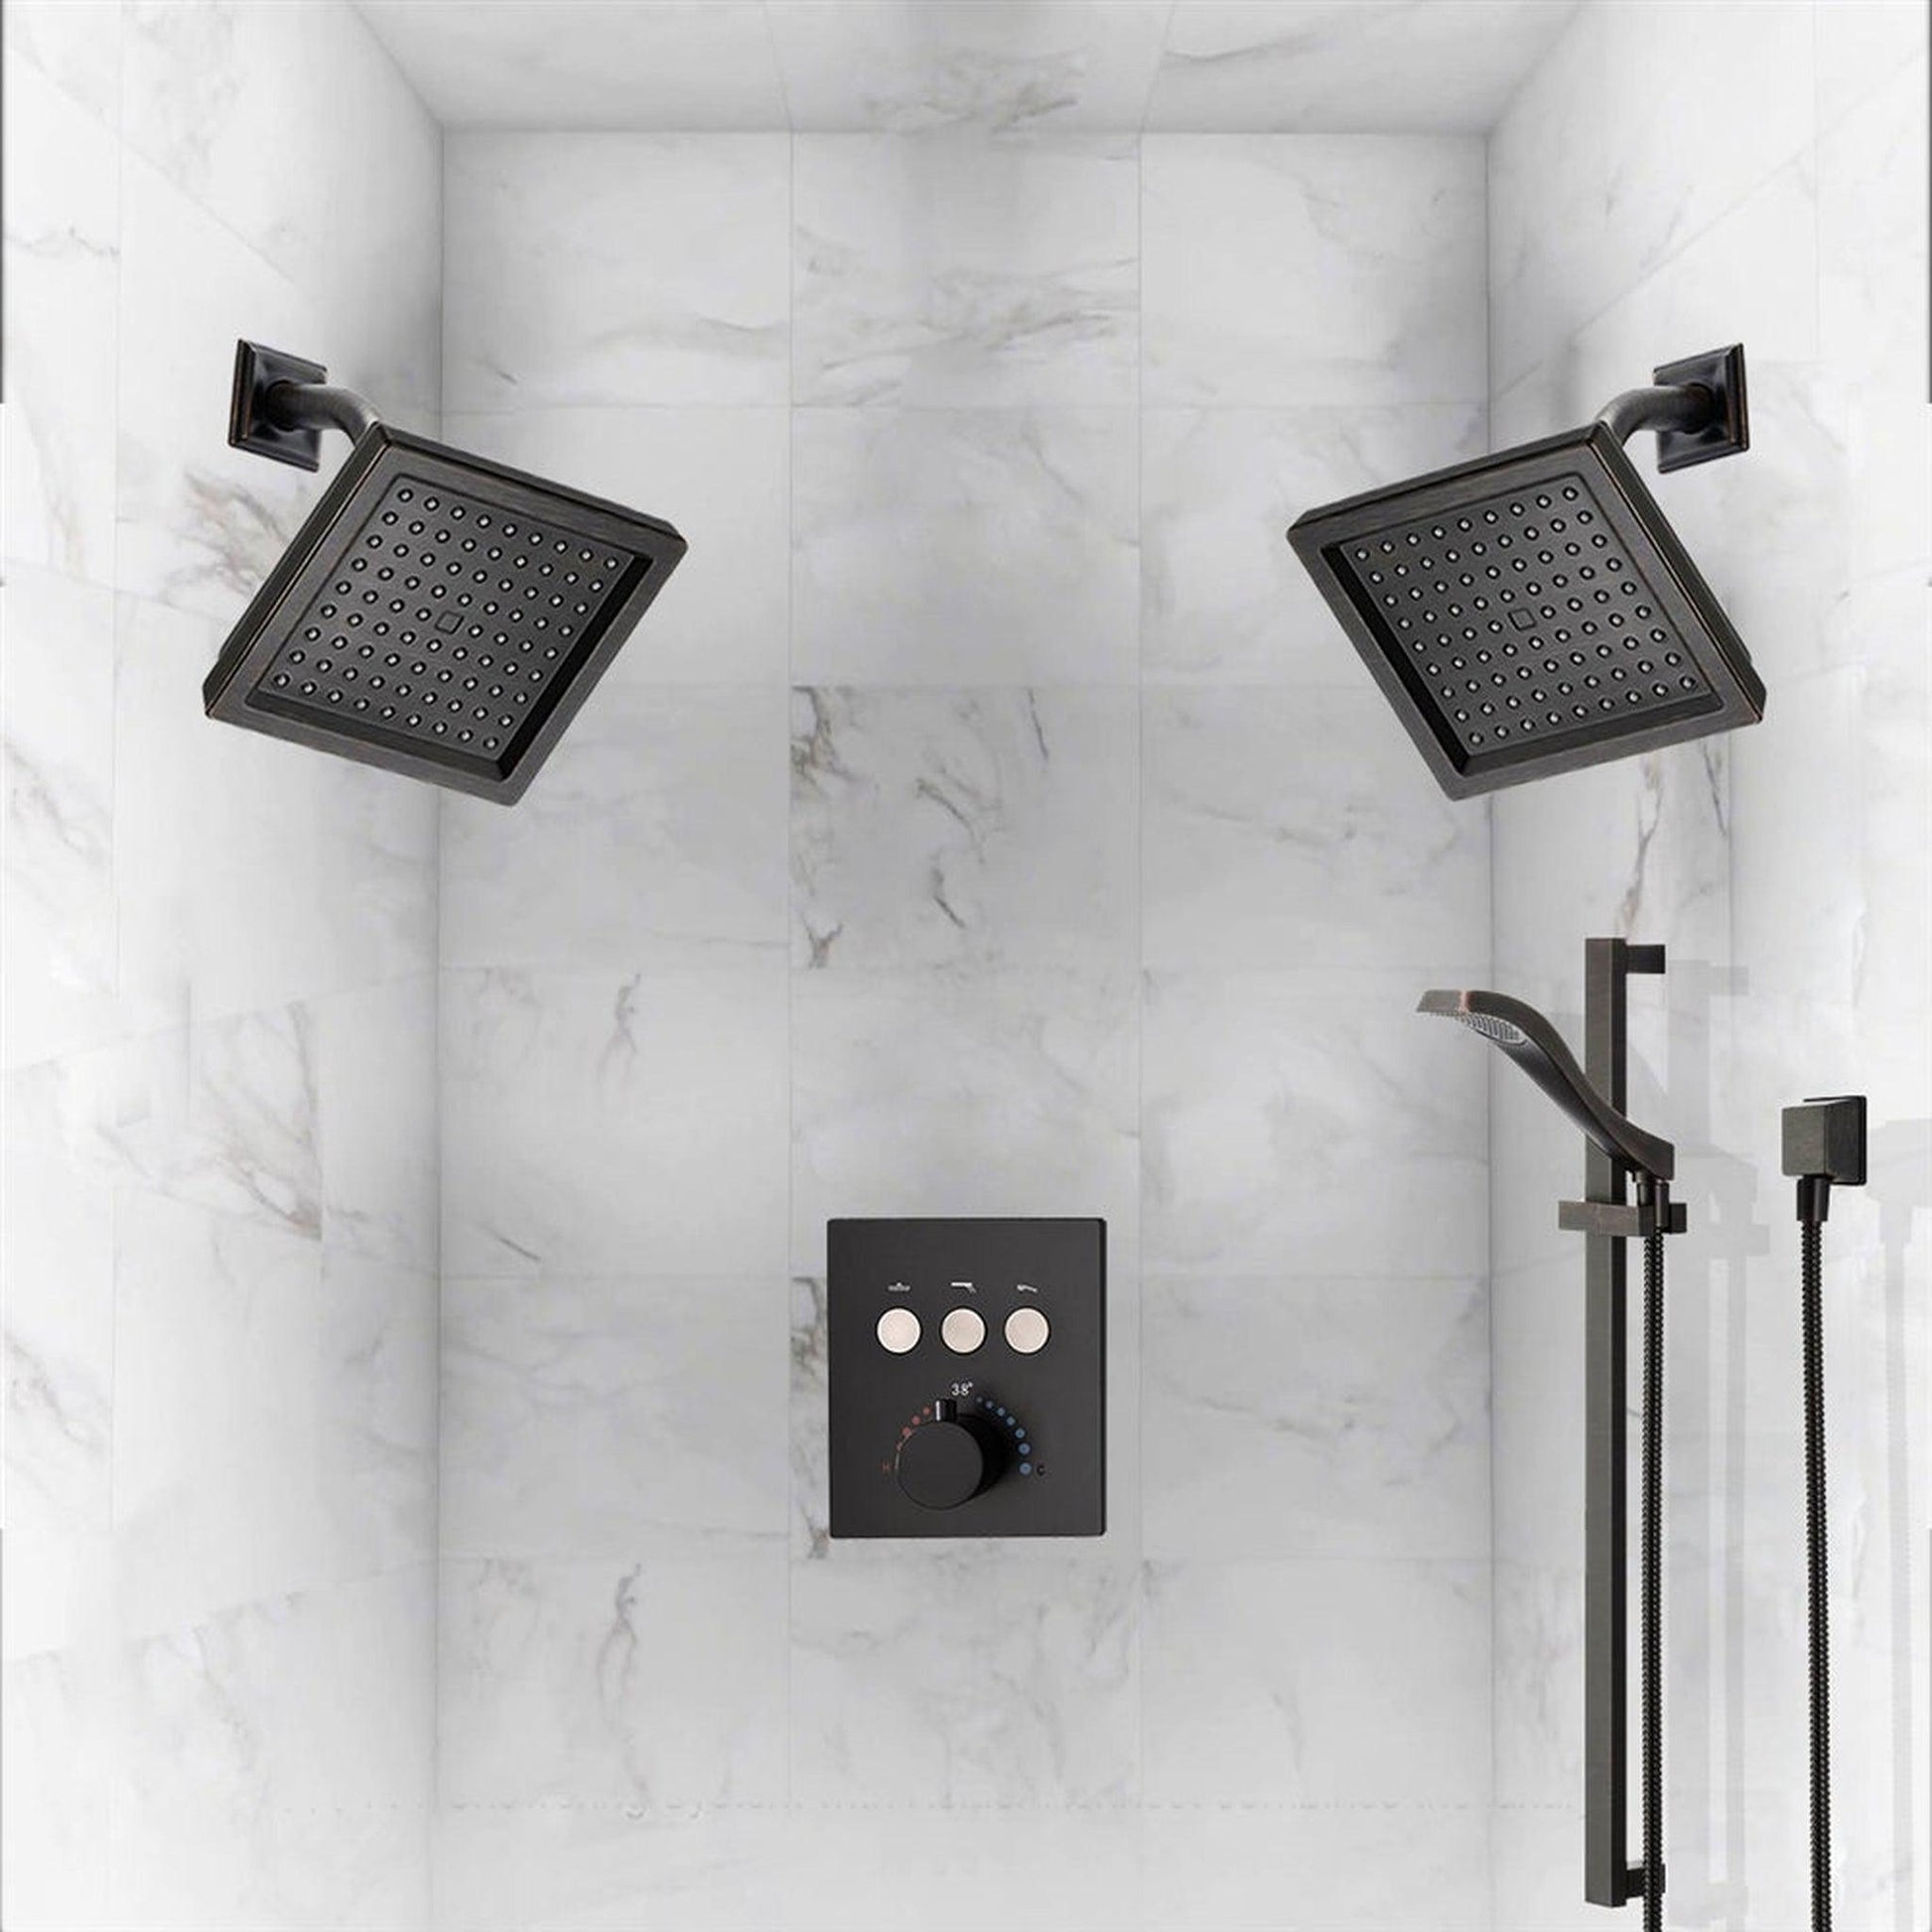 12 Matte Black Wall Mounted Rain Shower System with Rainfall Shower Head  Solid Brass